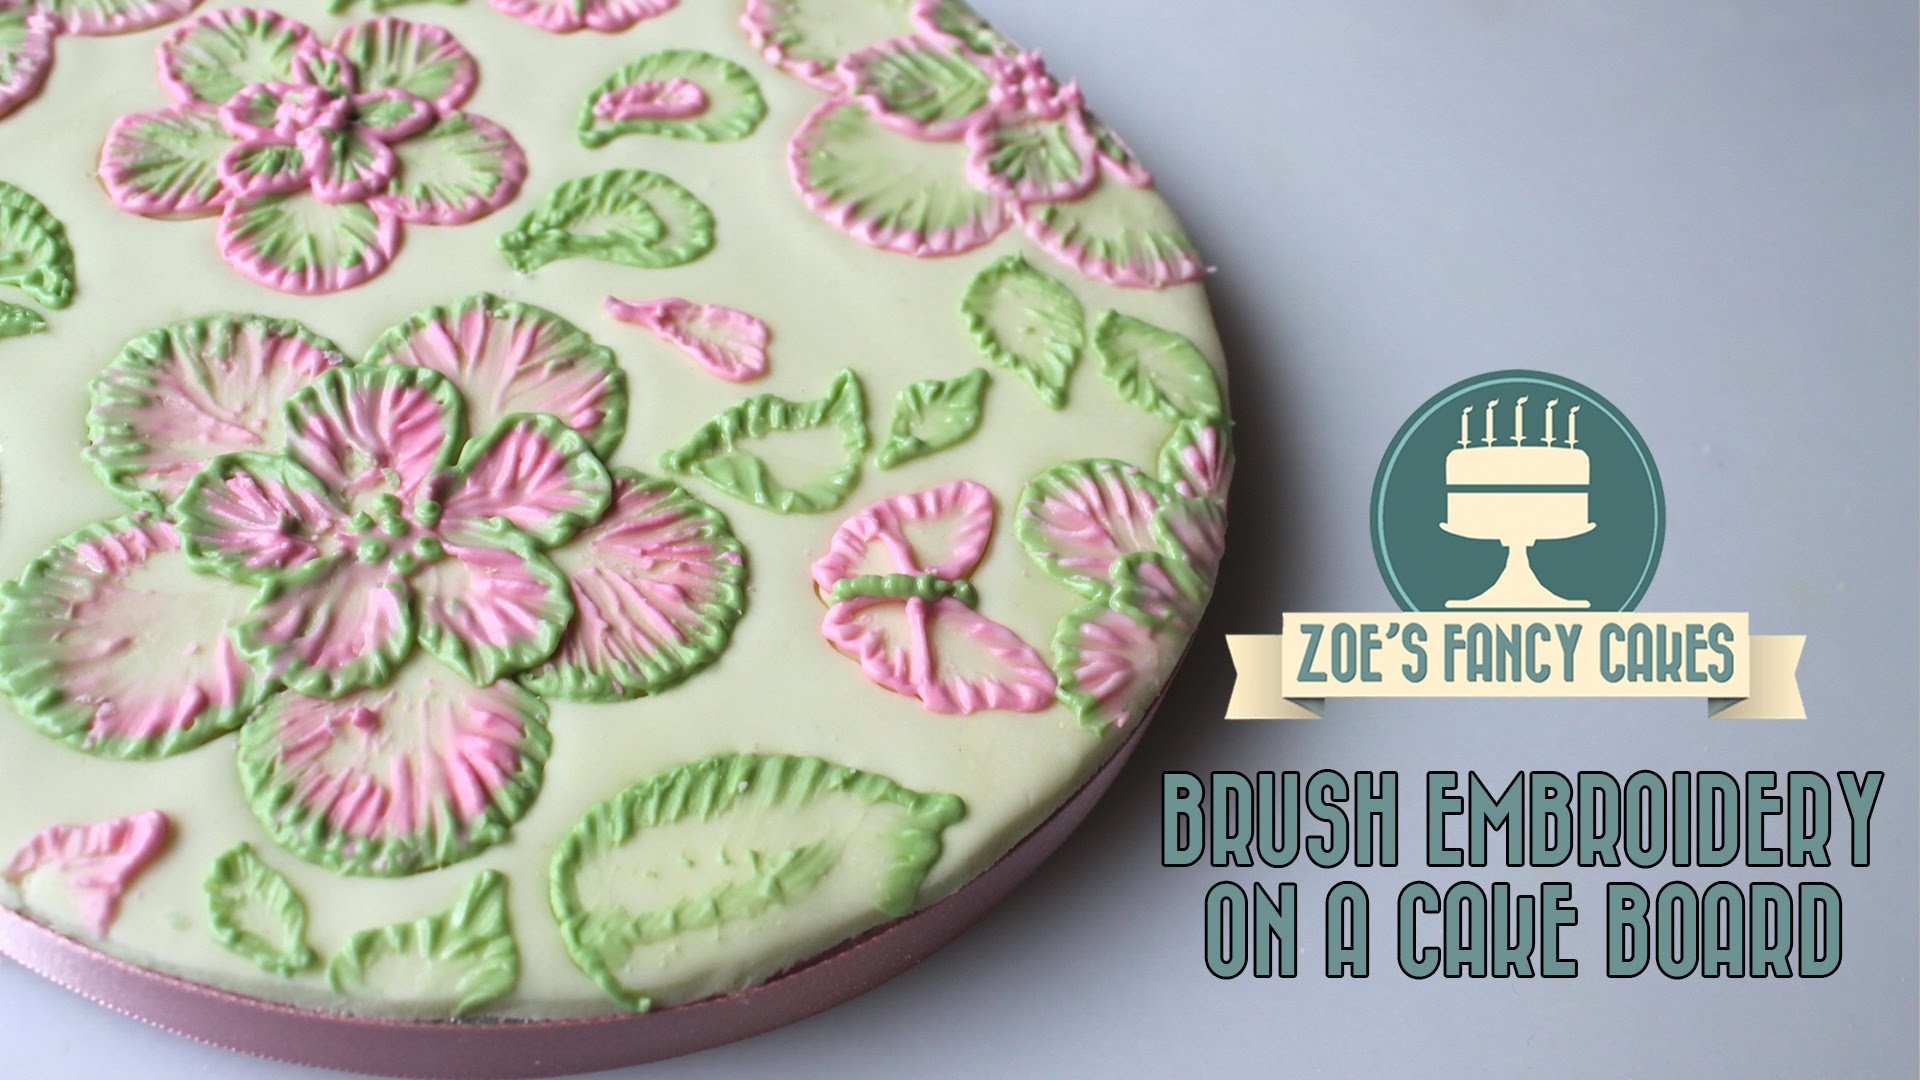 Royal icing brush embroidery on a cake board tutorial how to cake decorating tutorials